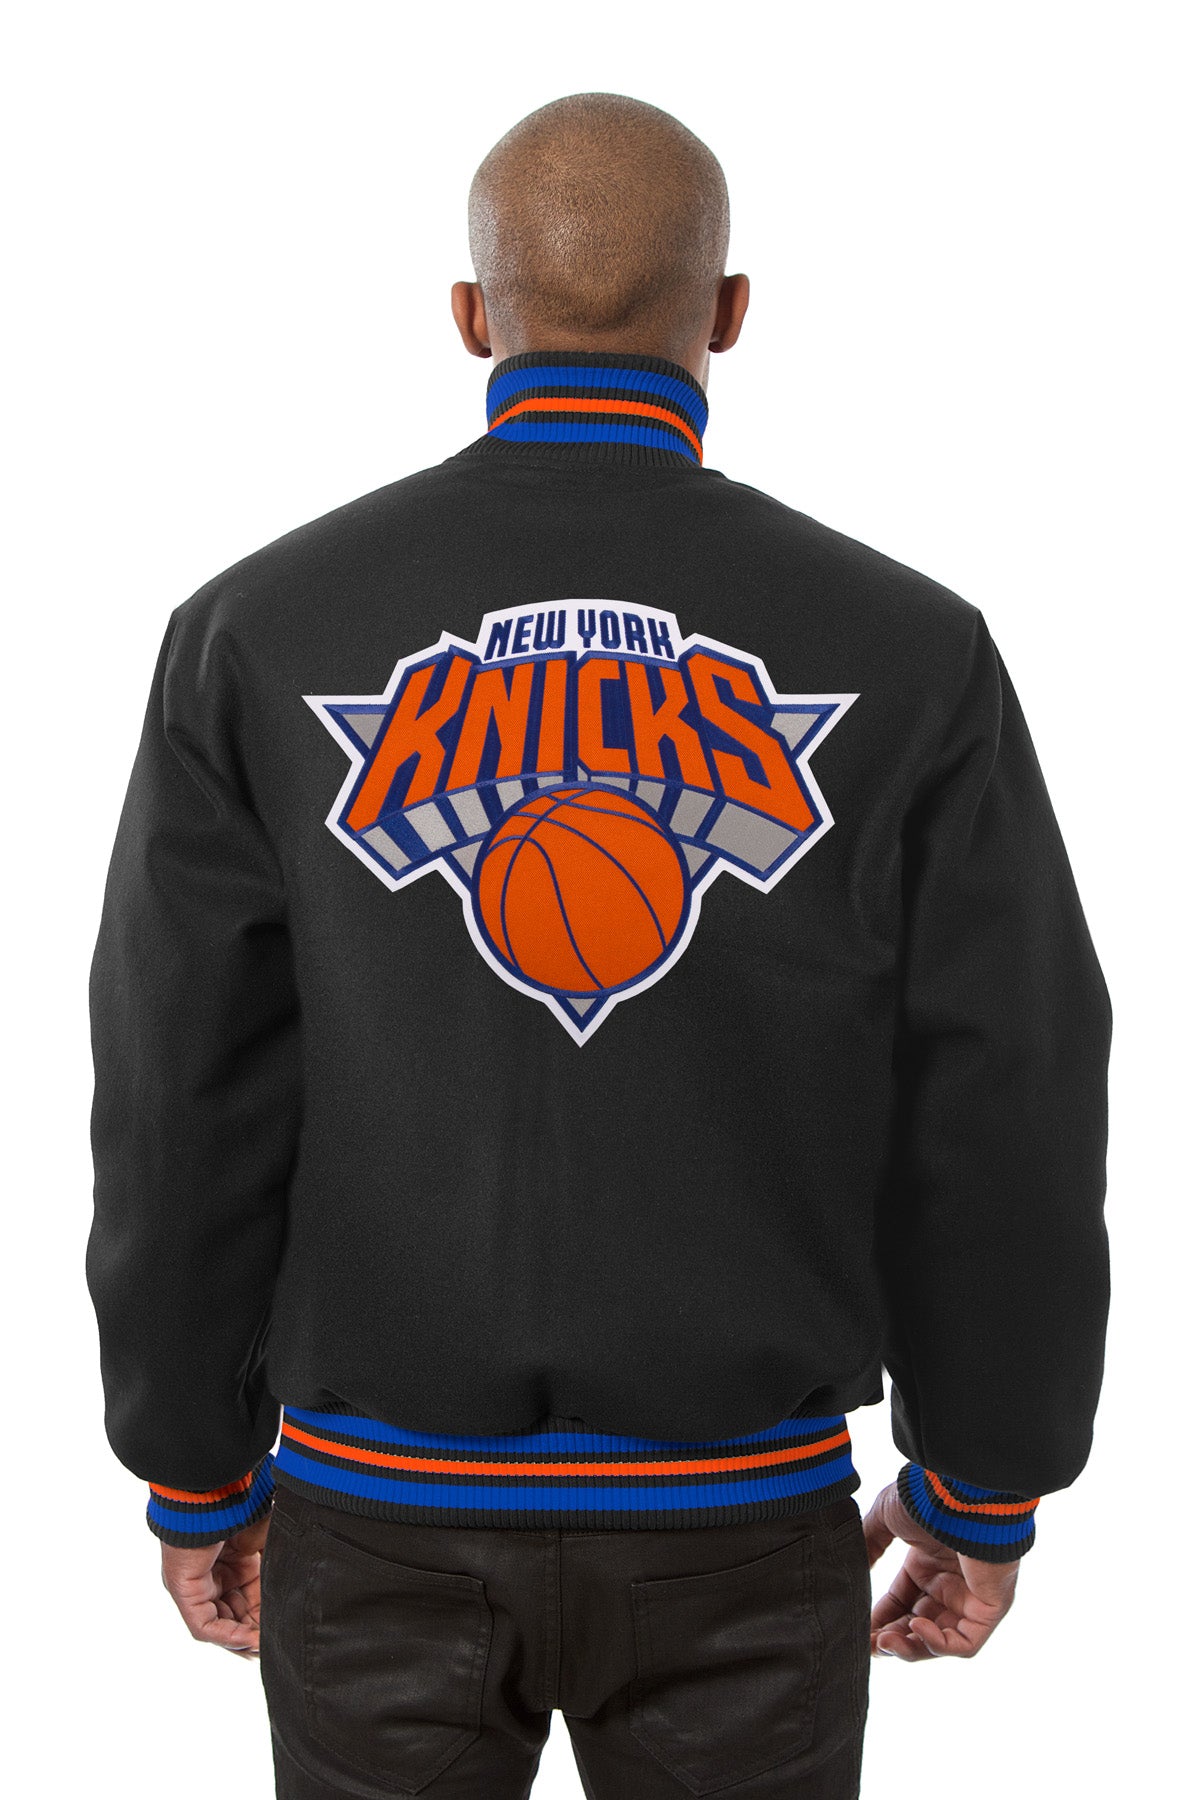 New York Knicks Embroidered Wool Jacket